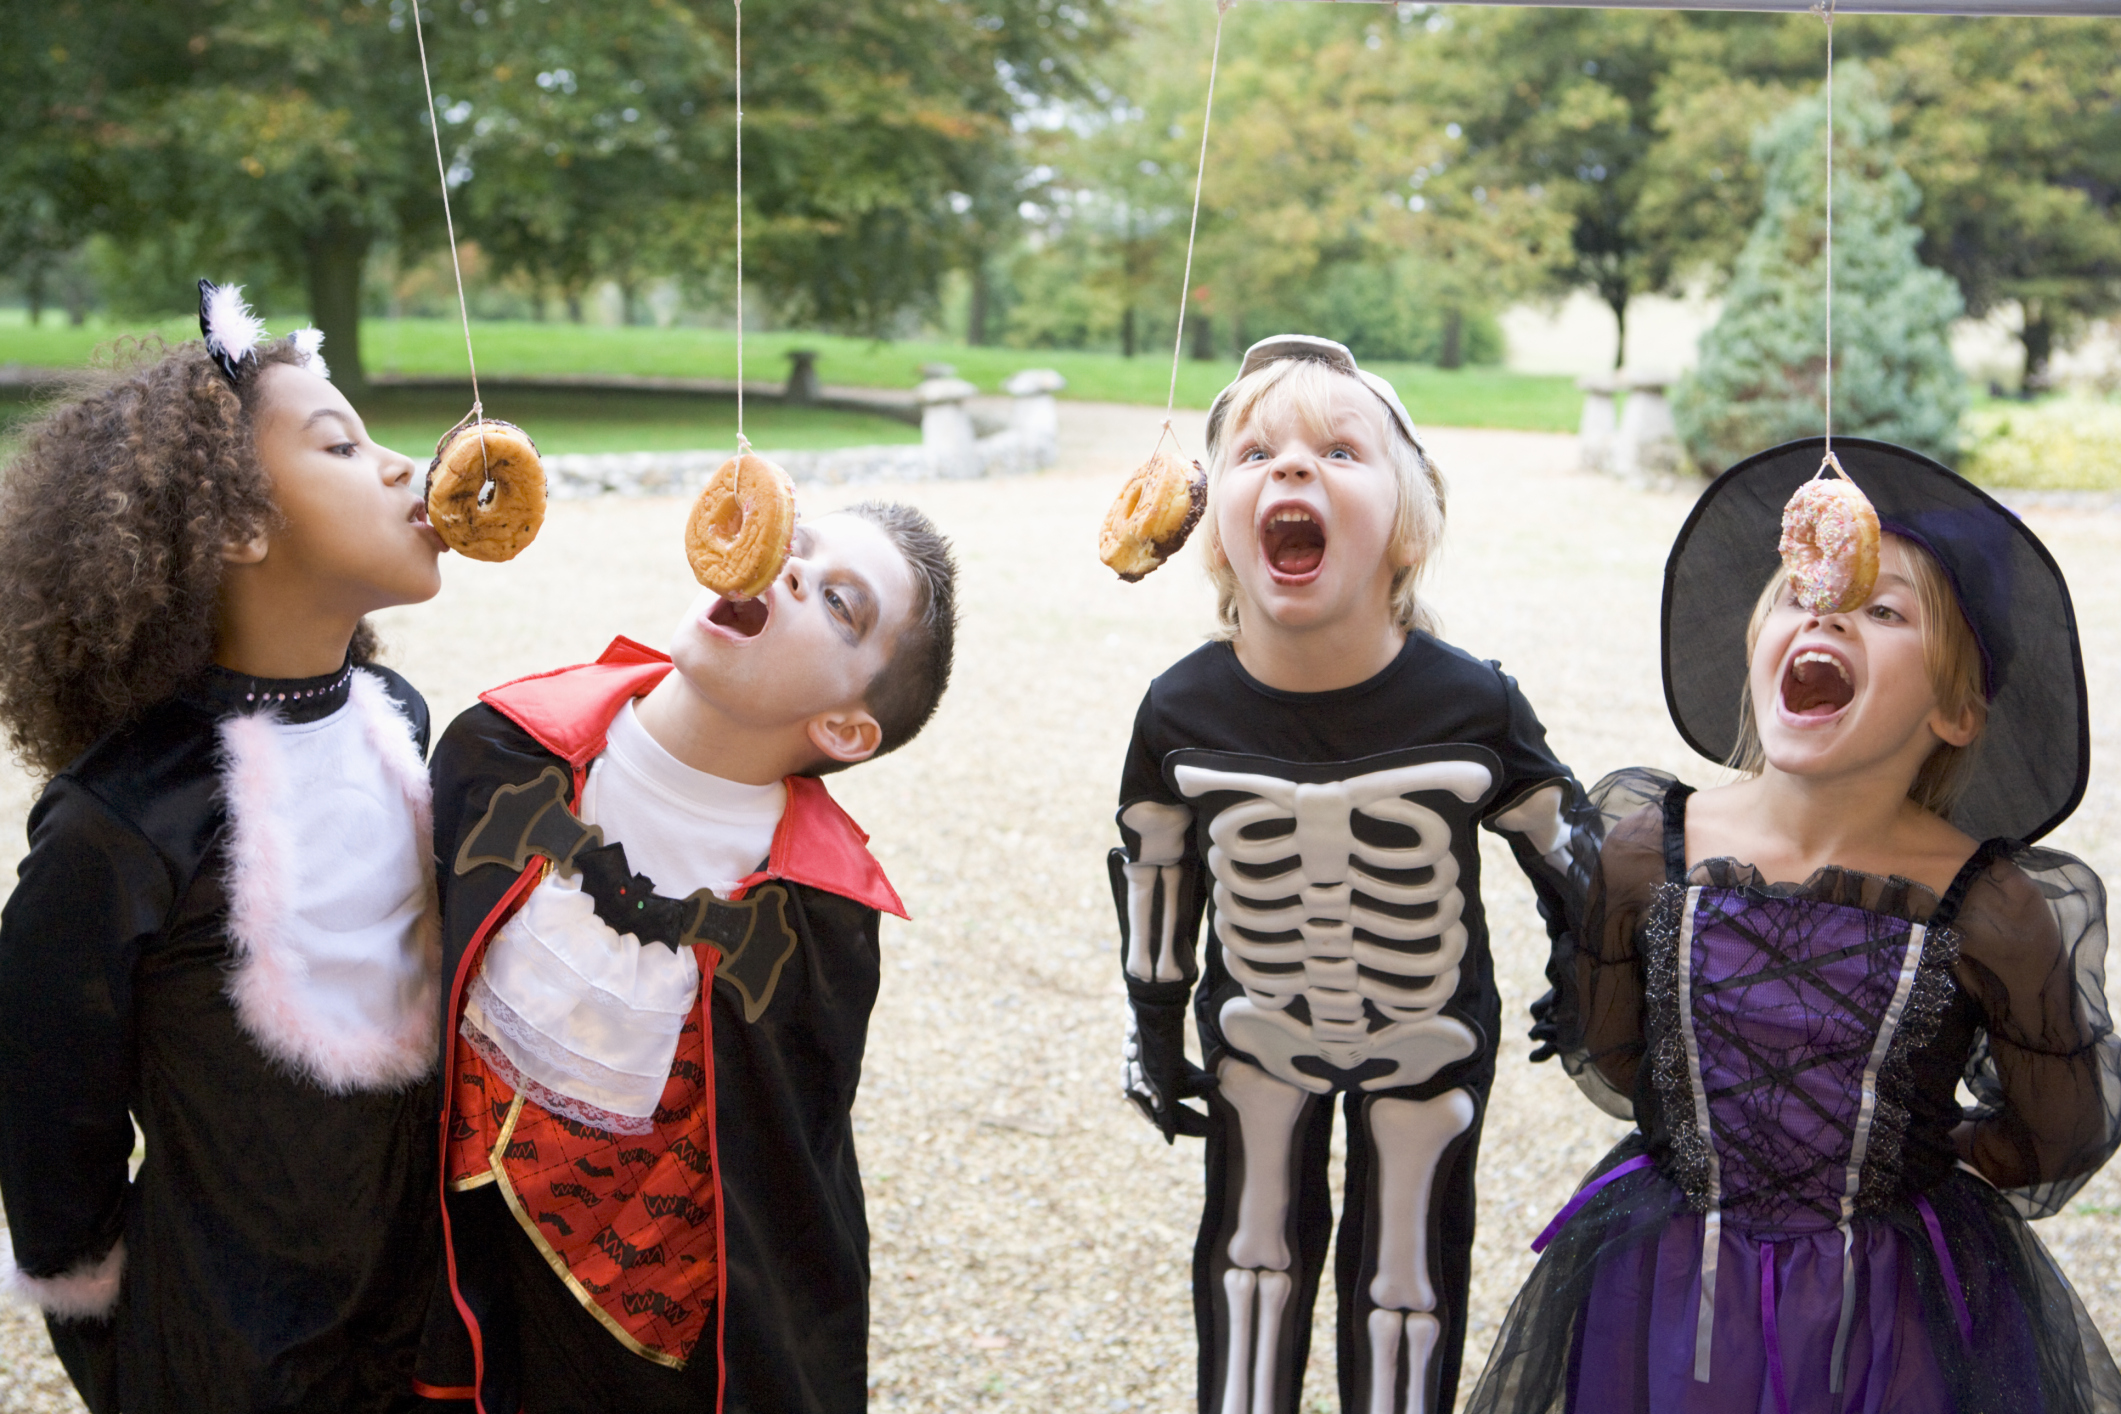 Four young friends on Halloween in costumes eating donuts hanging off strings.